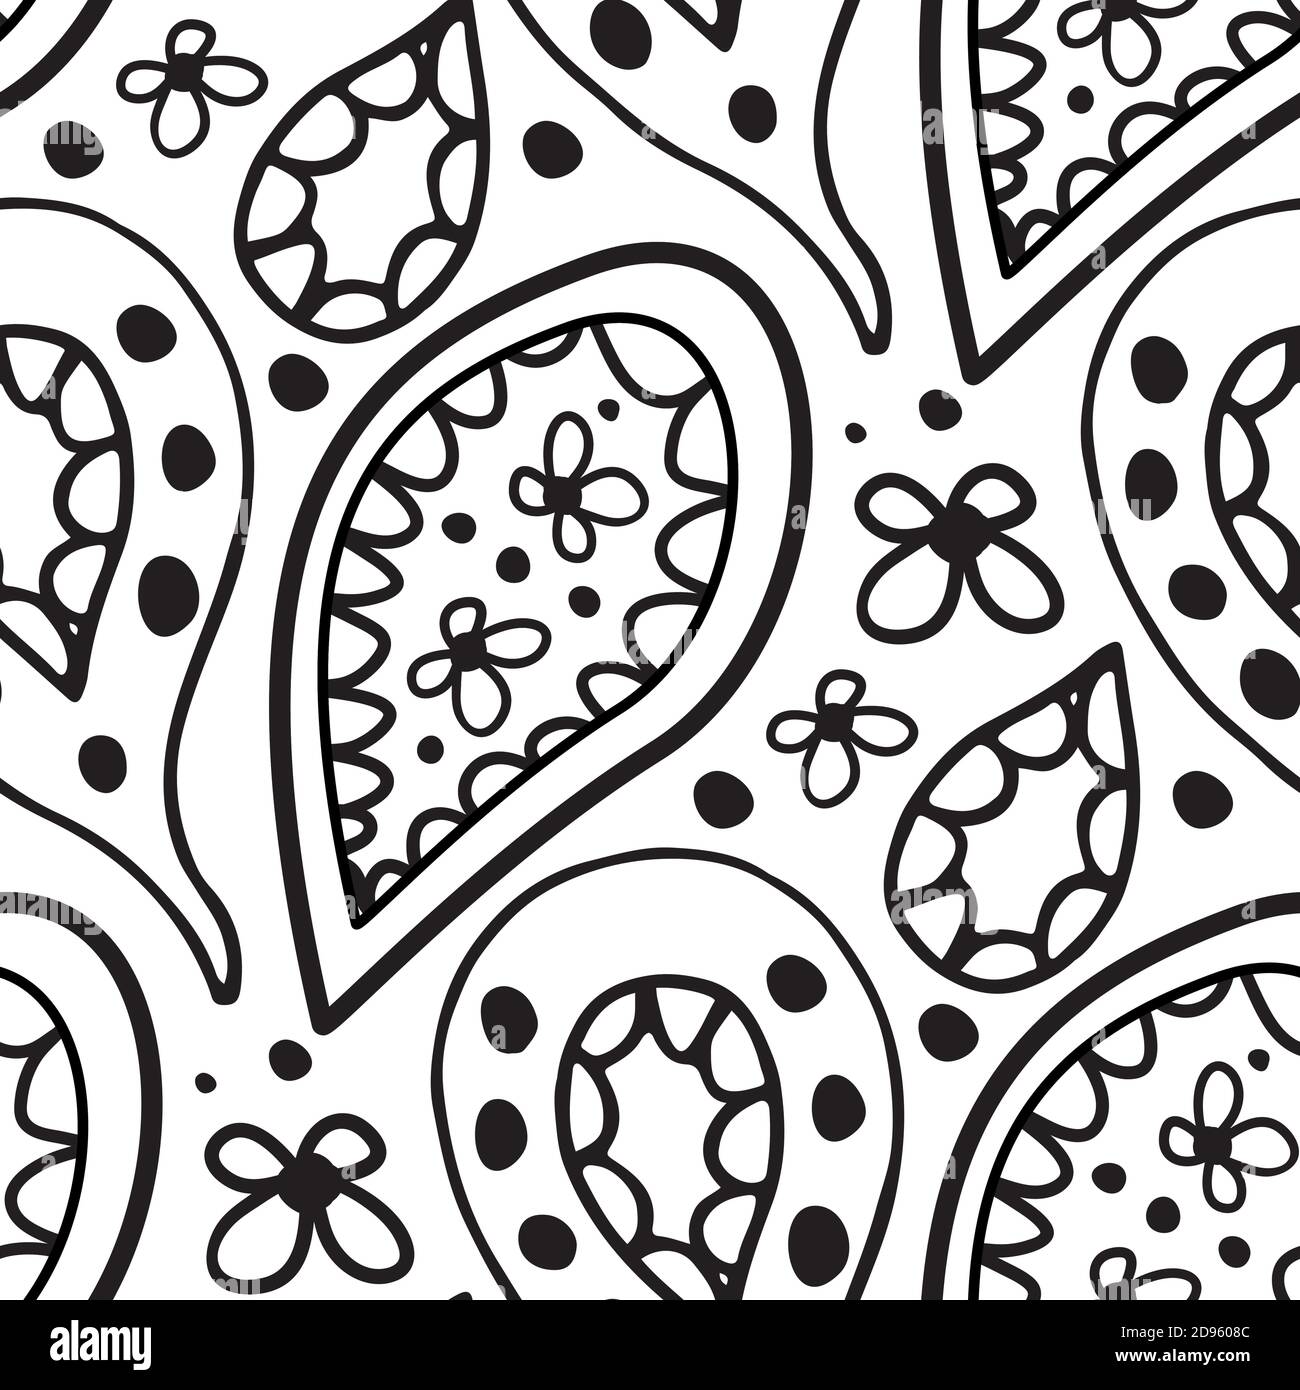 Monochrome doodle paisley seamless vector pattern. Hand drawn scribble ...